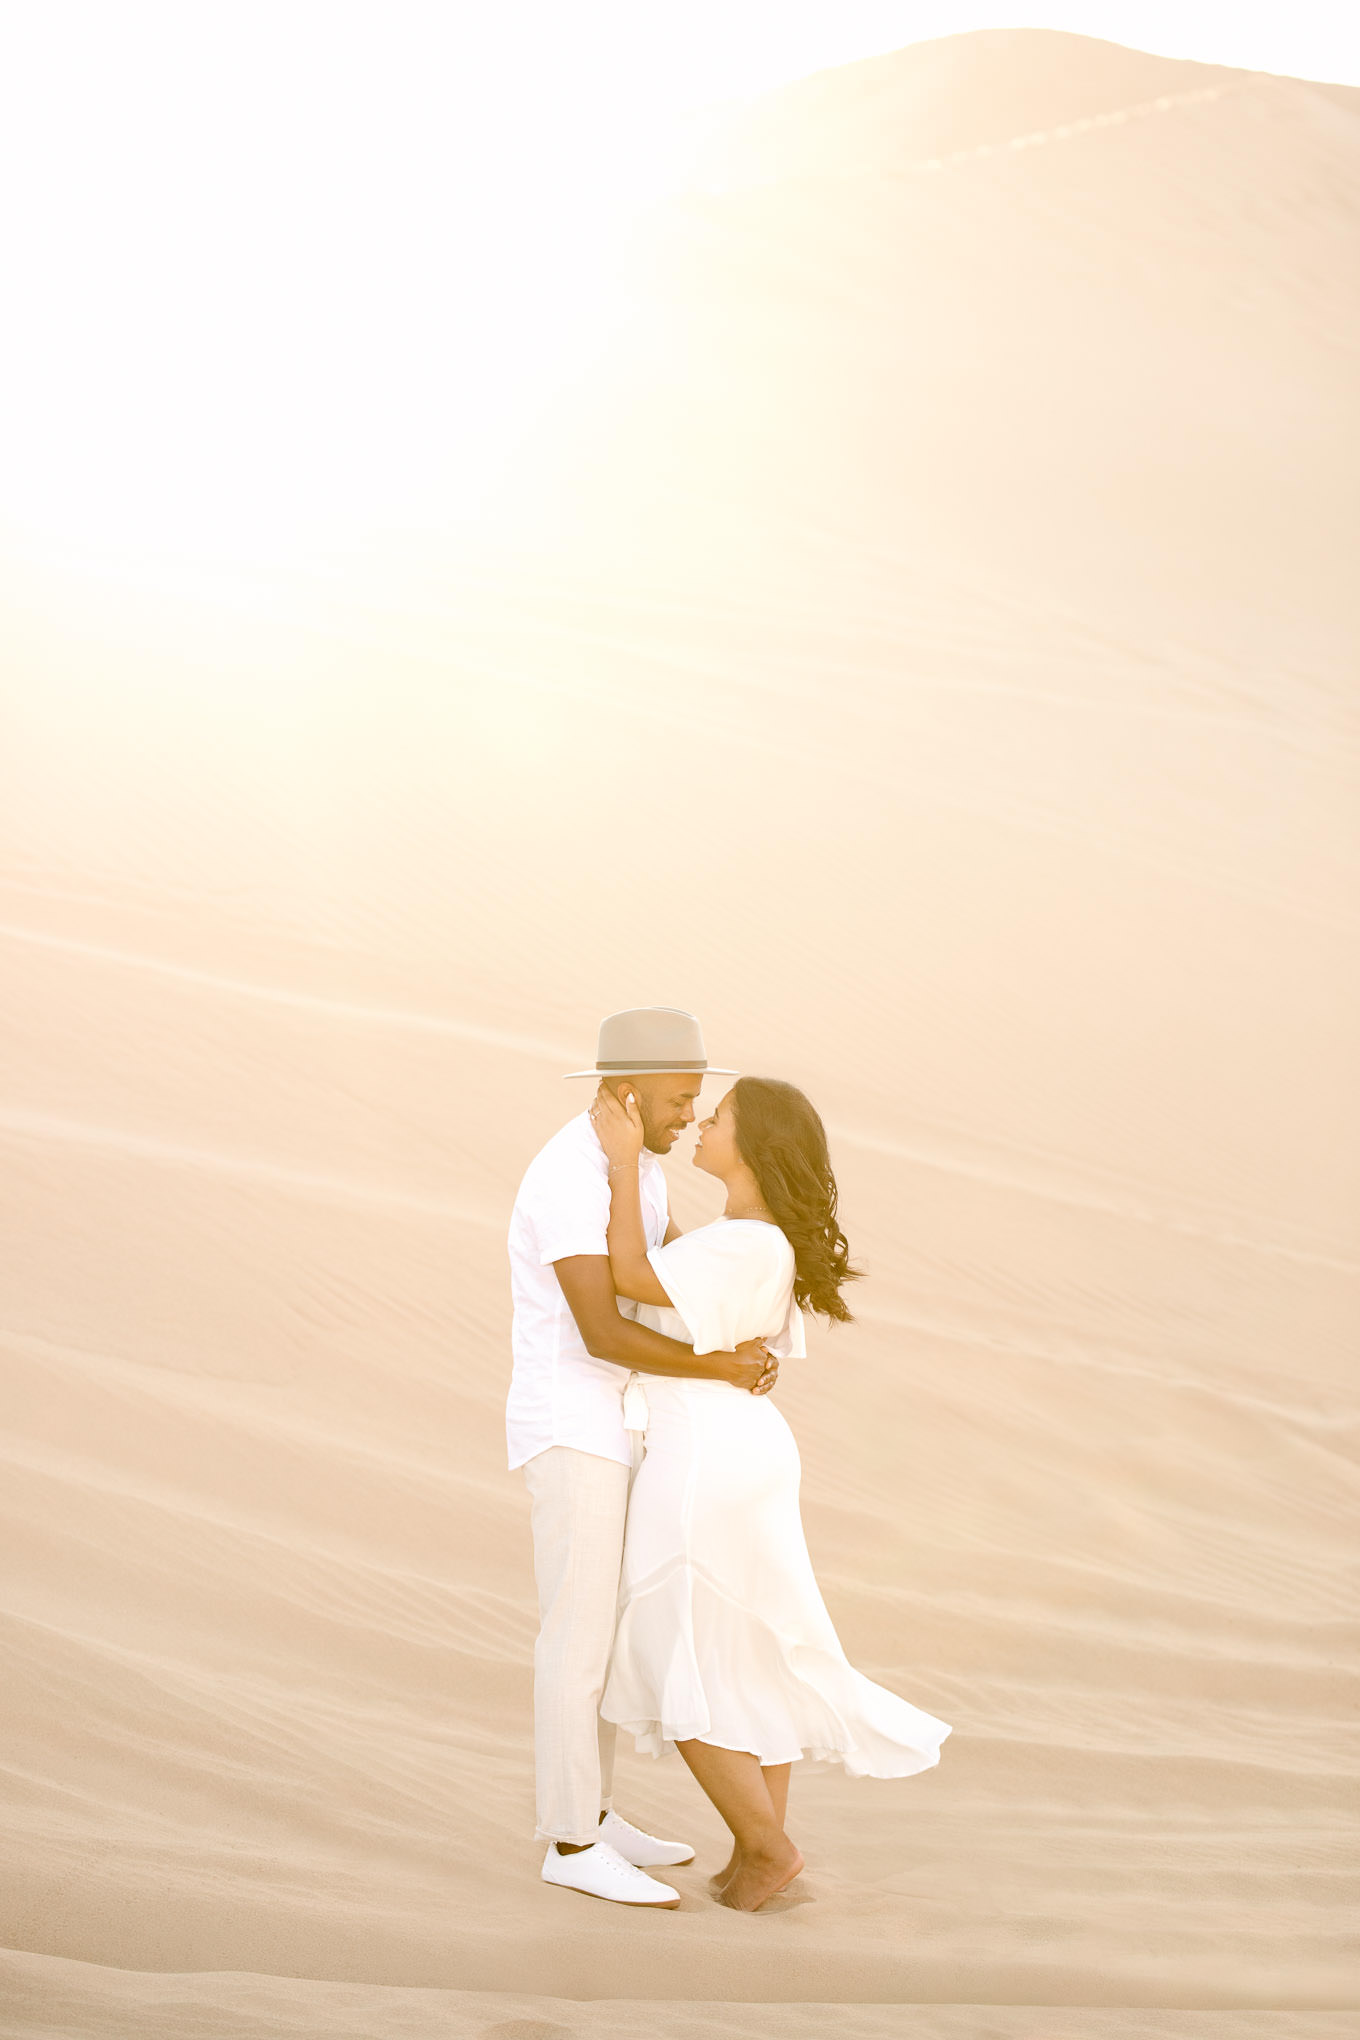 Engaged couple sharing a kiss on sand dune | California Sand Dunes engagement session | Colorful Palm Springs wedding photography | #palmspringsphotographer #sanddunes #engagementsession #southerncalifornia  Source: Mary Costa Photography | Los Angeles